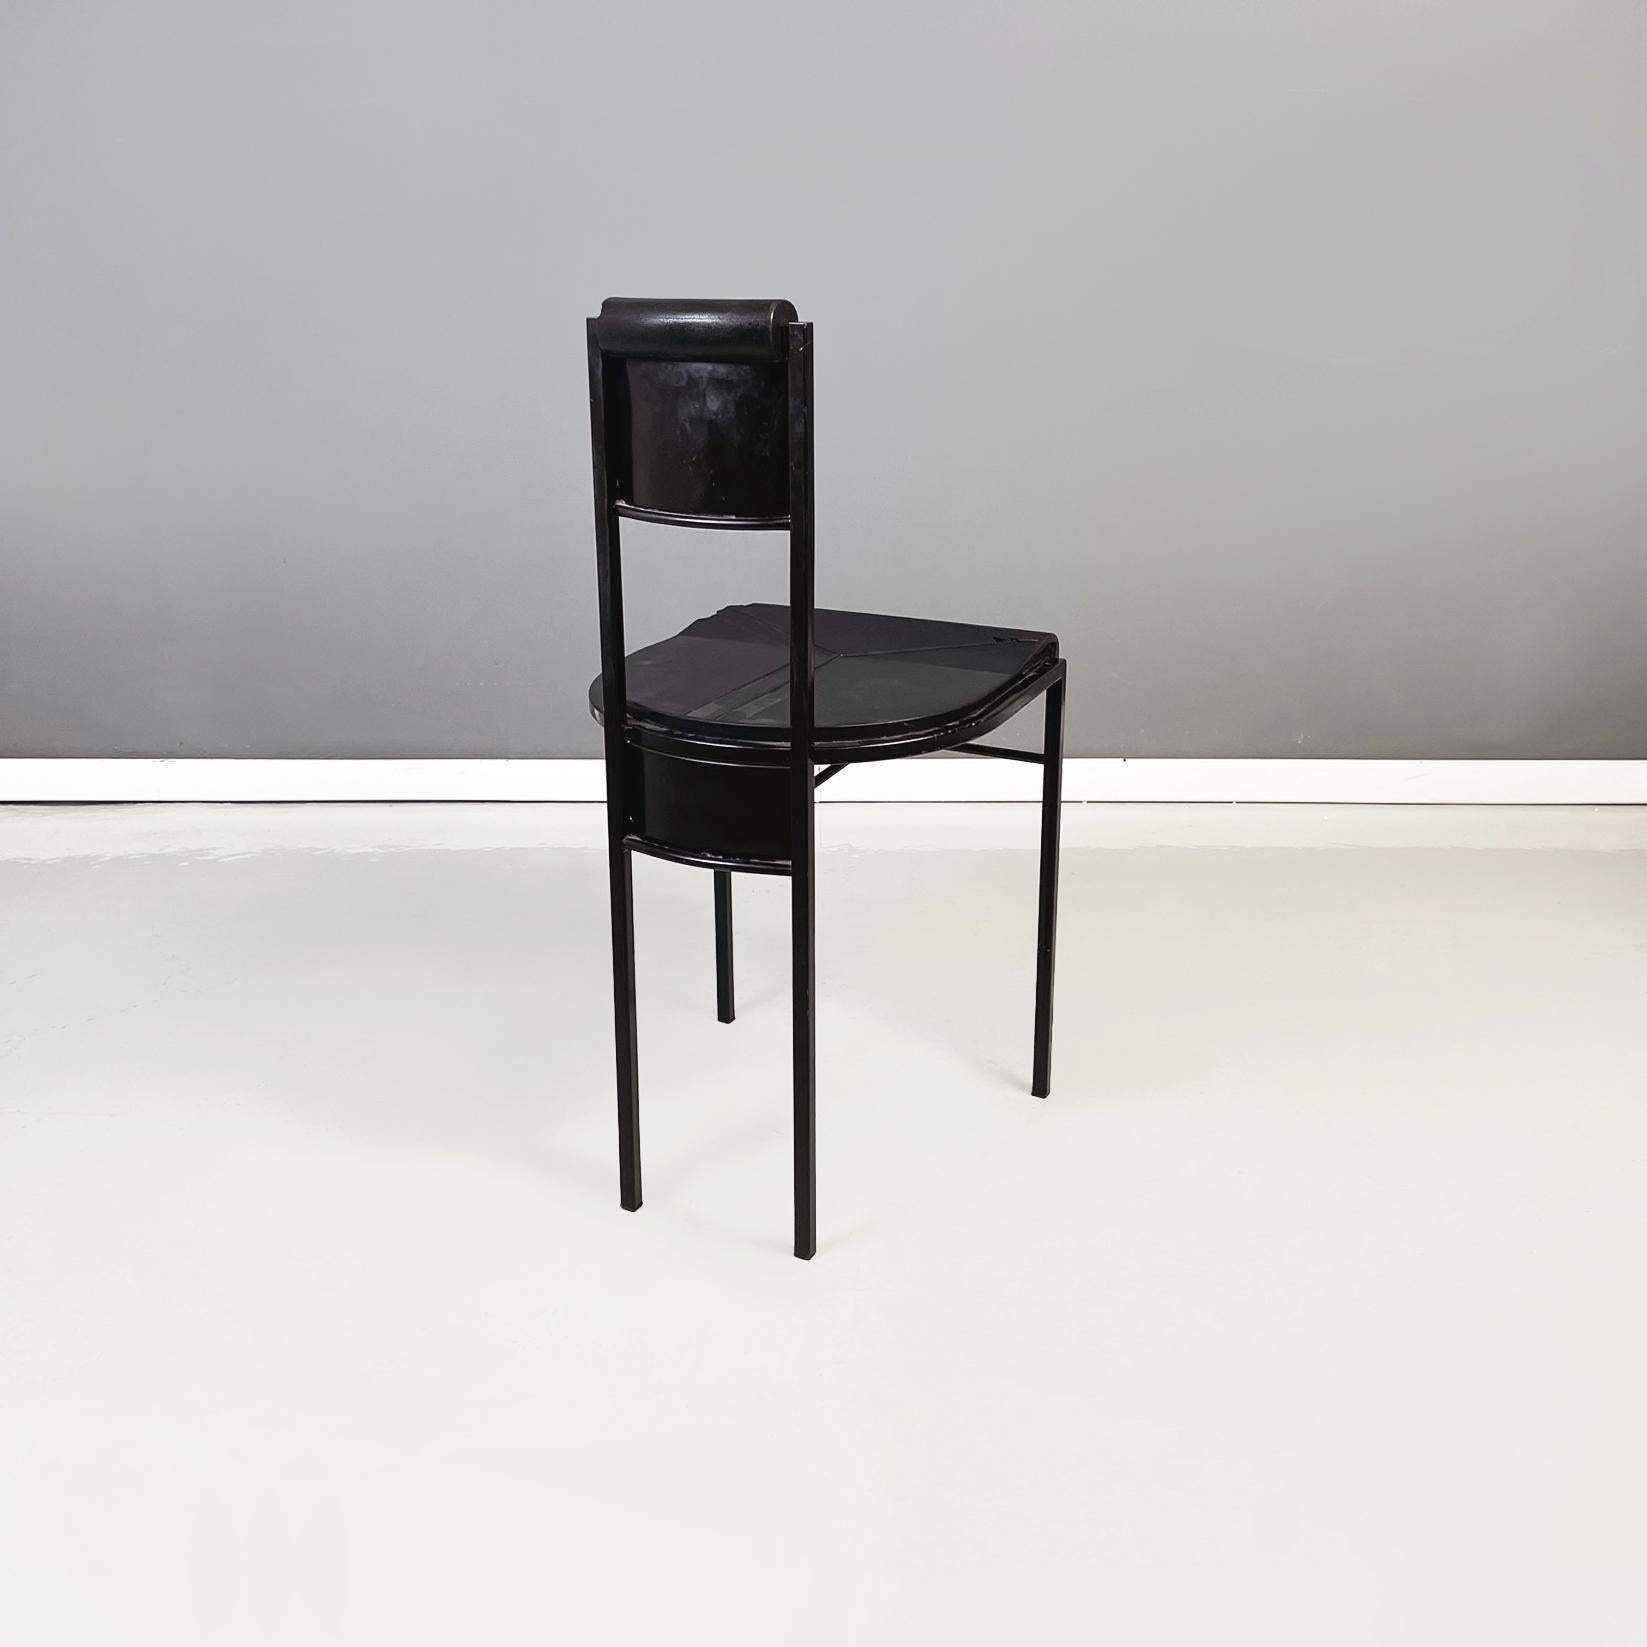 Late 20th Century Italian Modern Black Metal and Rubber Chair by Zeus, 1990s For Sale